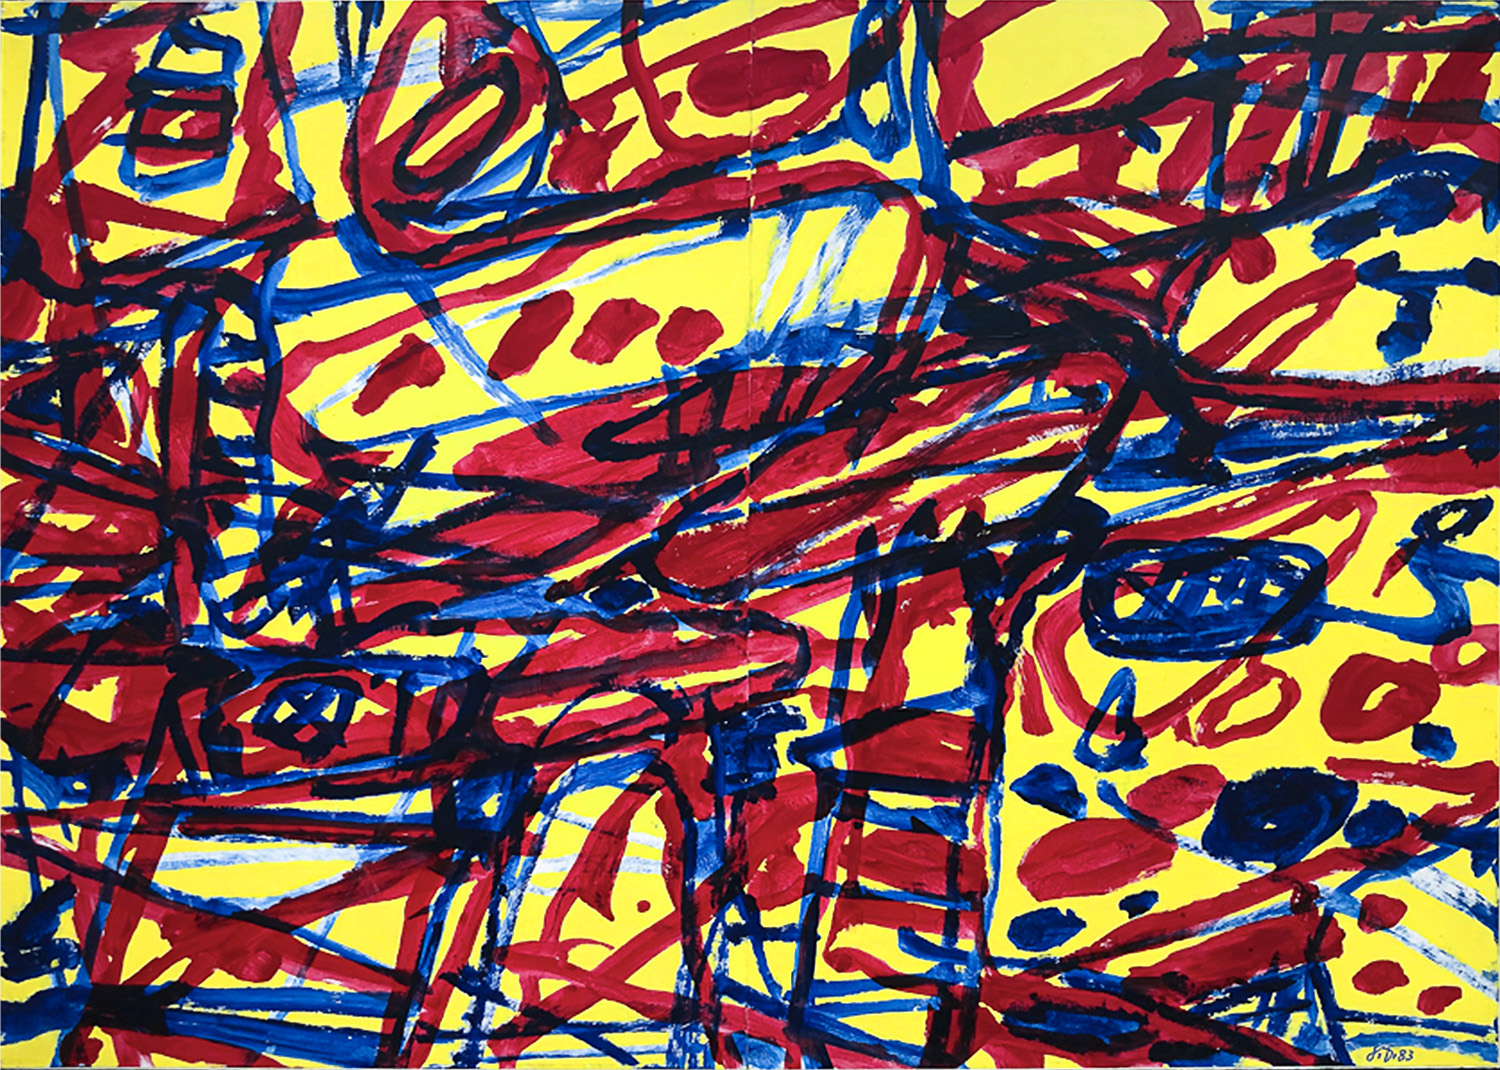 Jean Dubuffet work on paper with red, yellow and blue primary colors